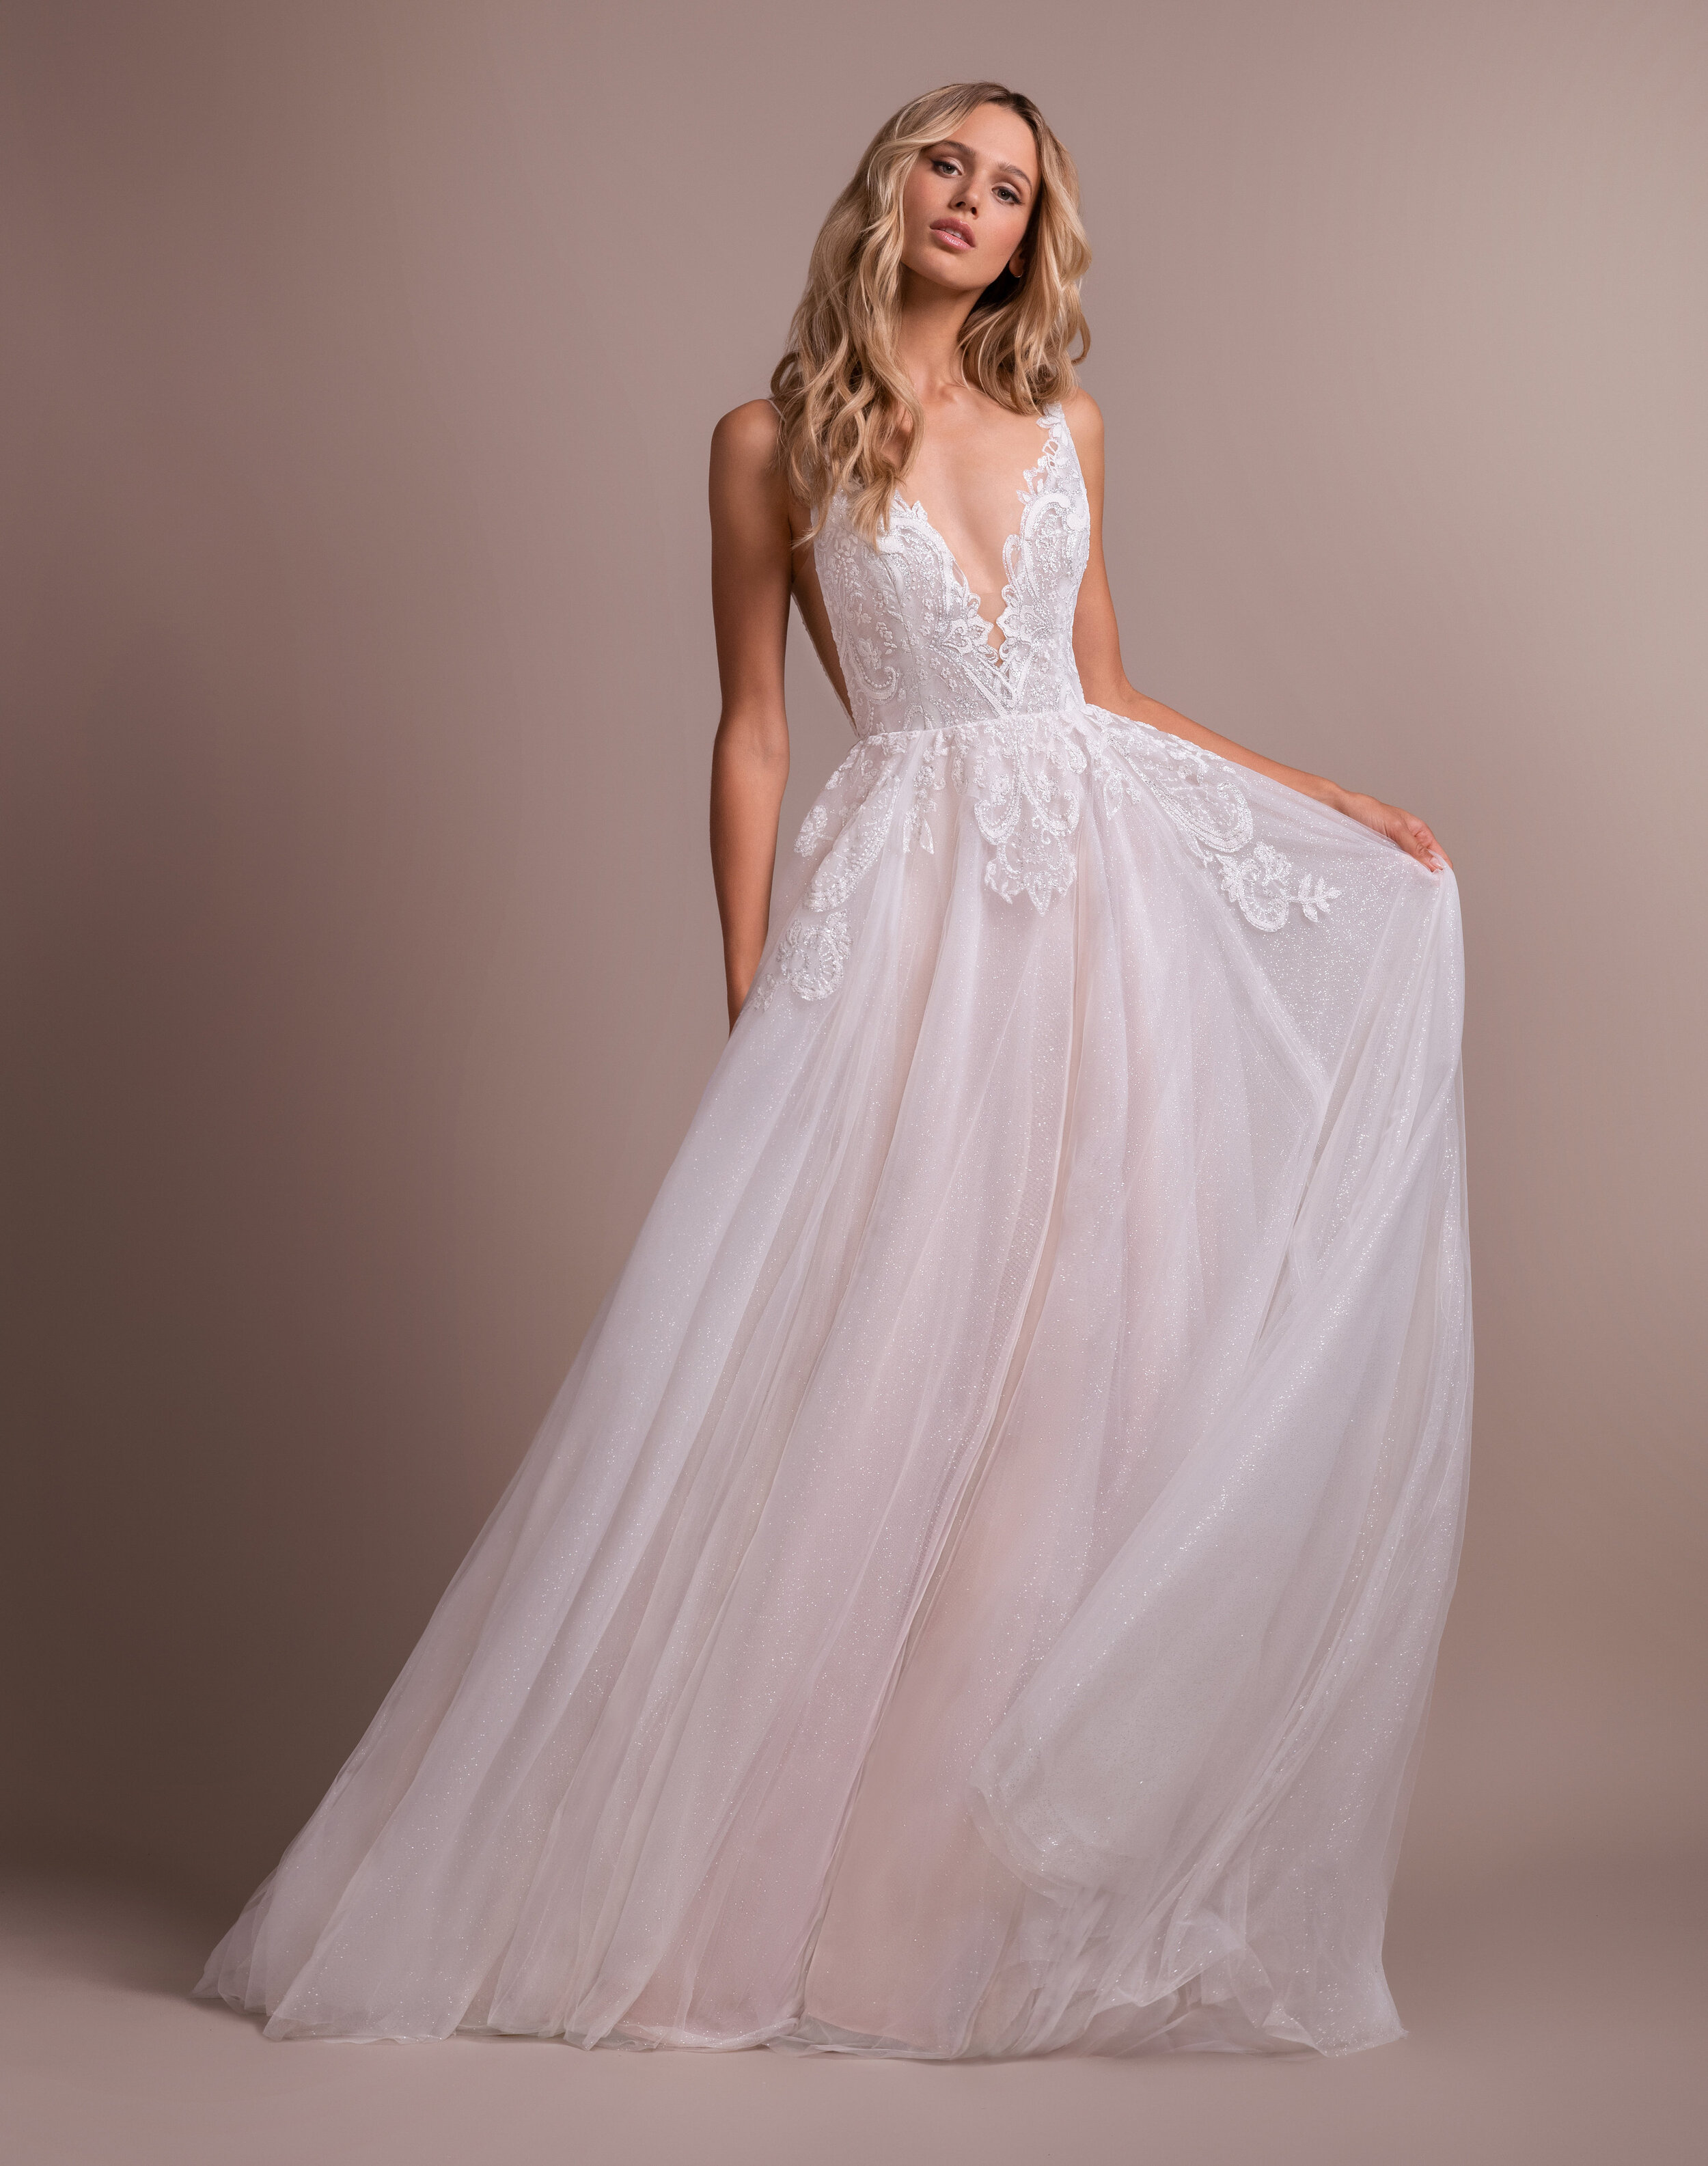 leah gown hayley paige price